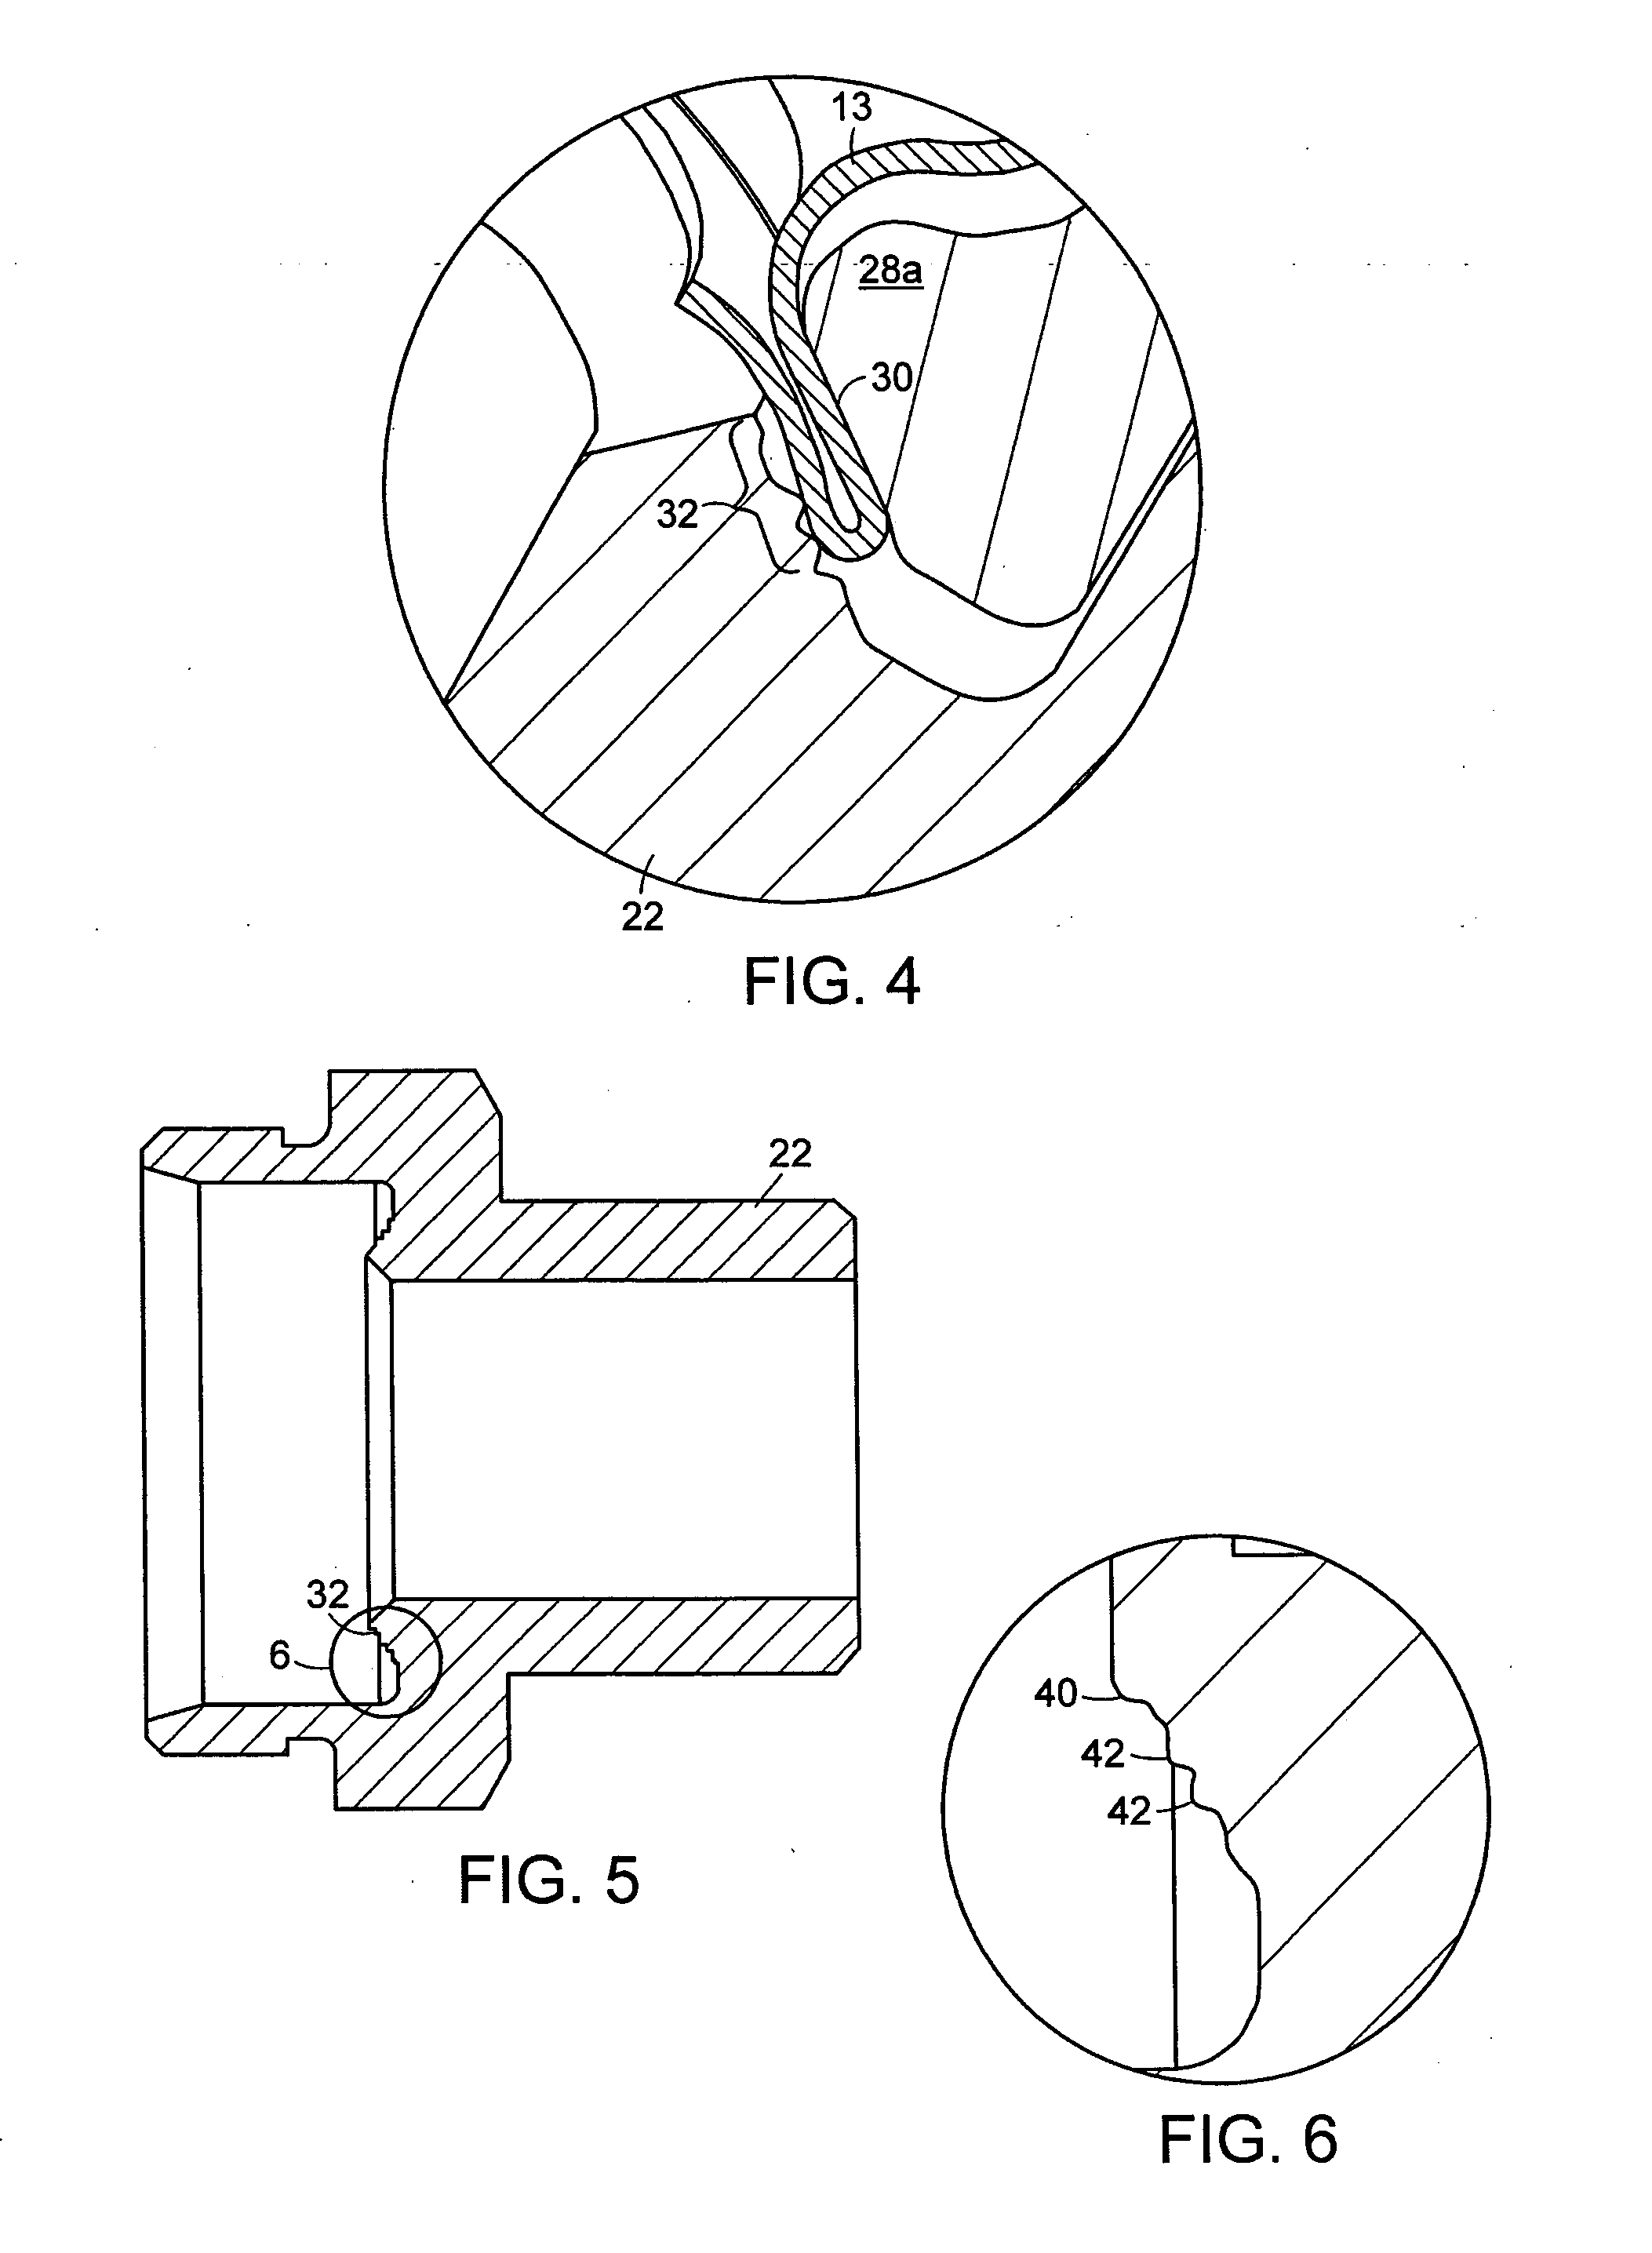 Sealing device with ridges for corrugated stainless steel tubing